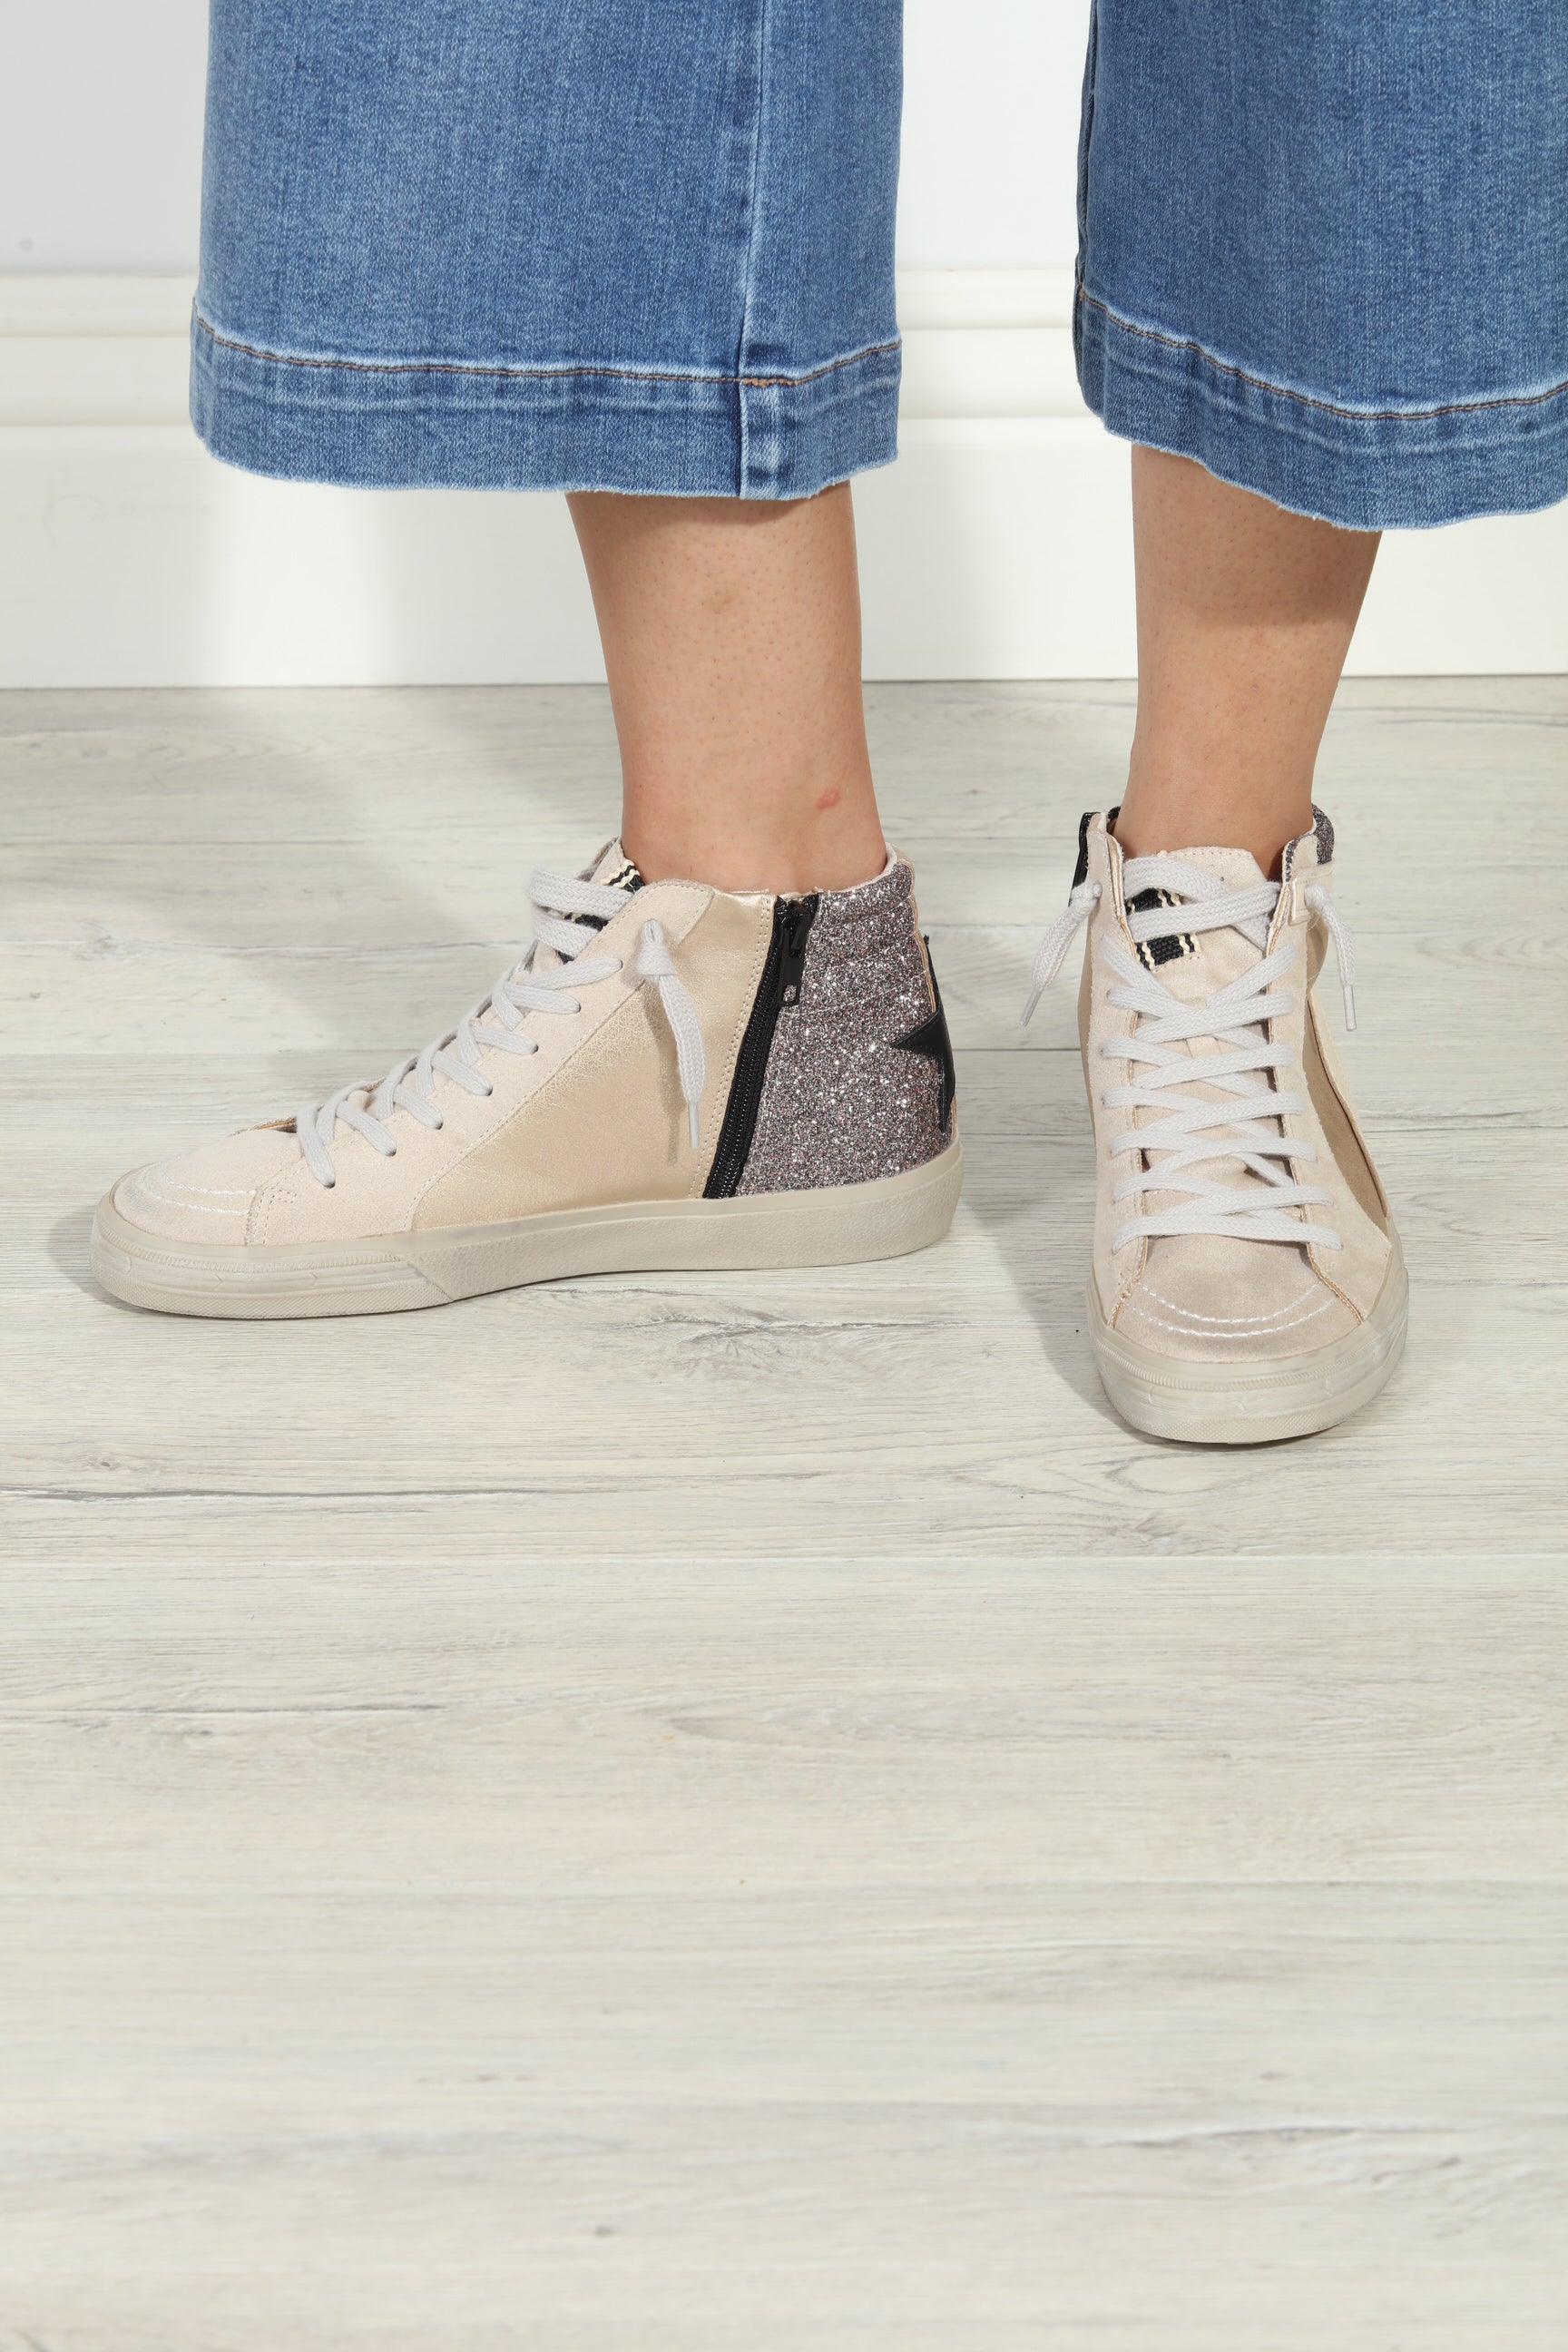 Rooney Pewter Glitter High-Top Sneakers